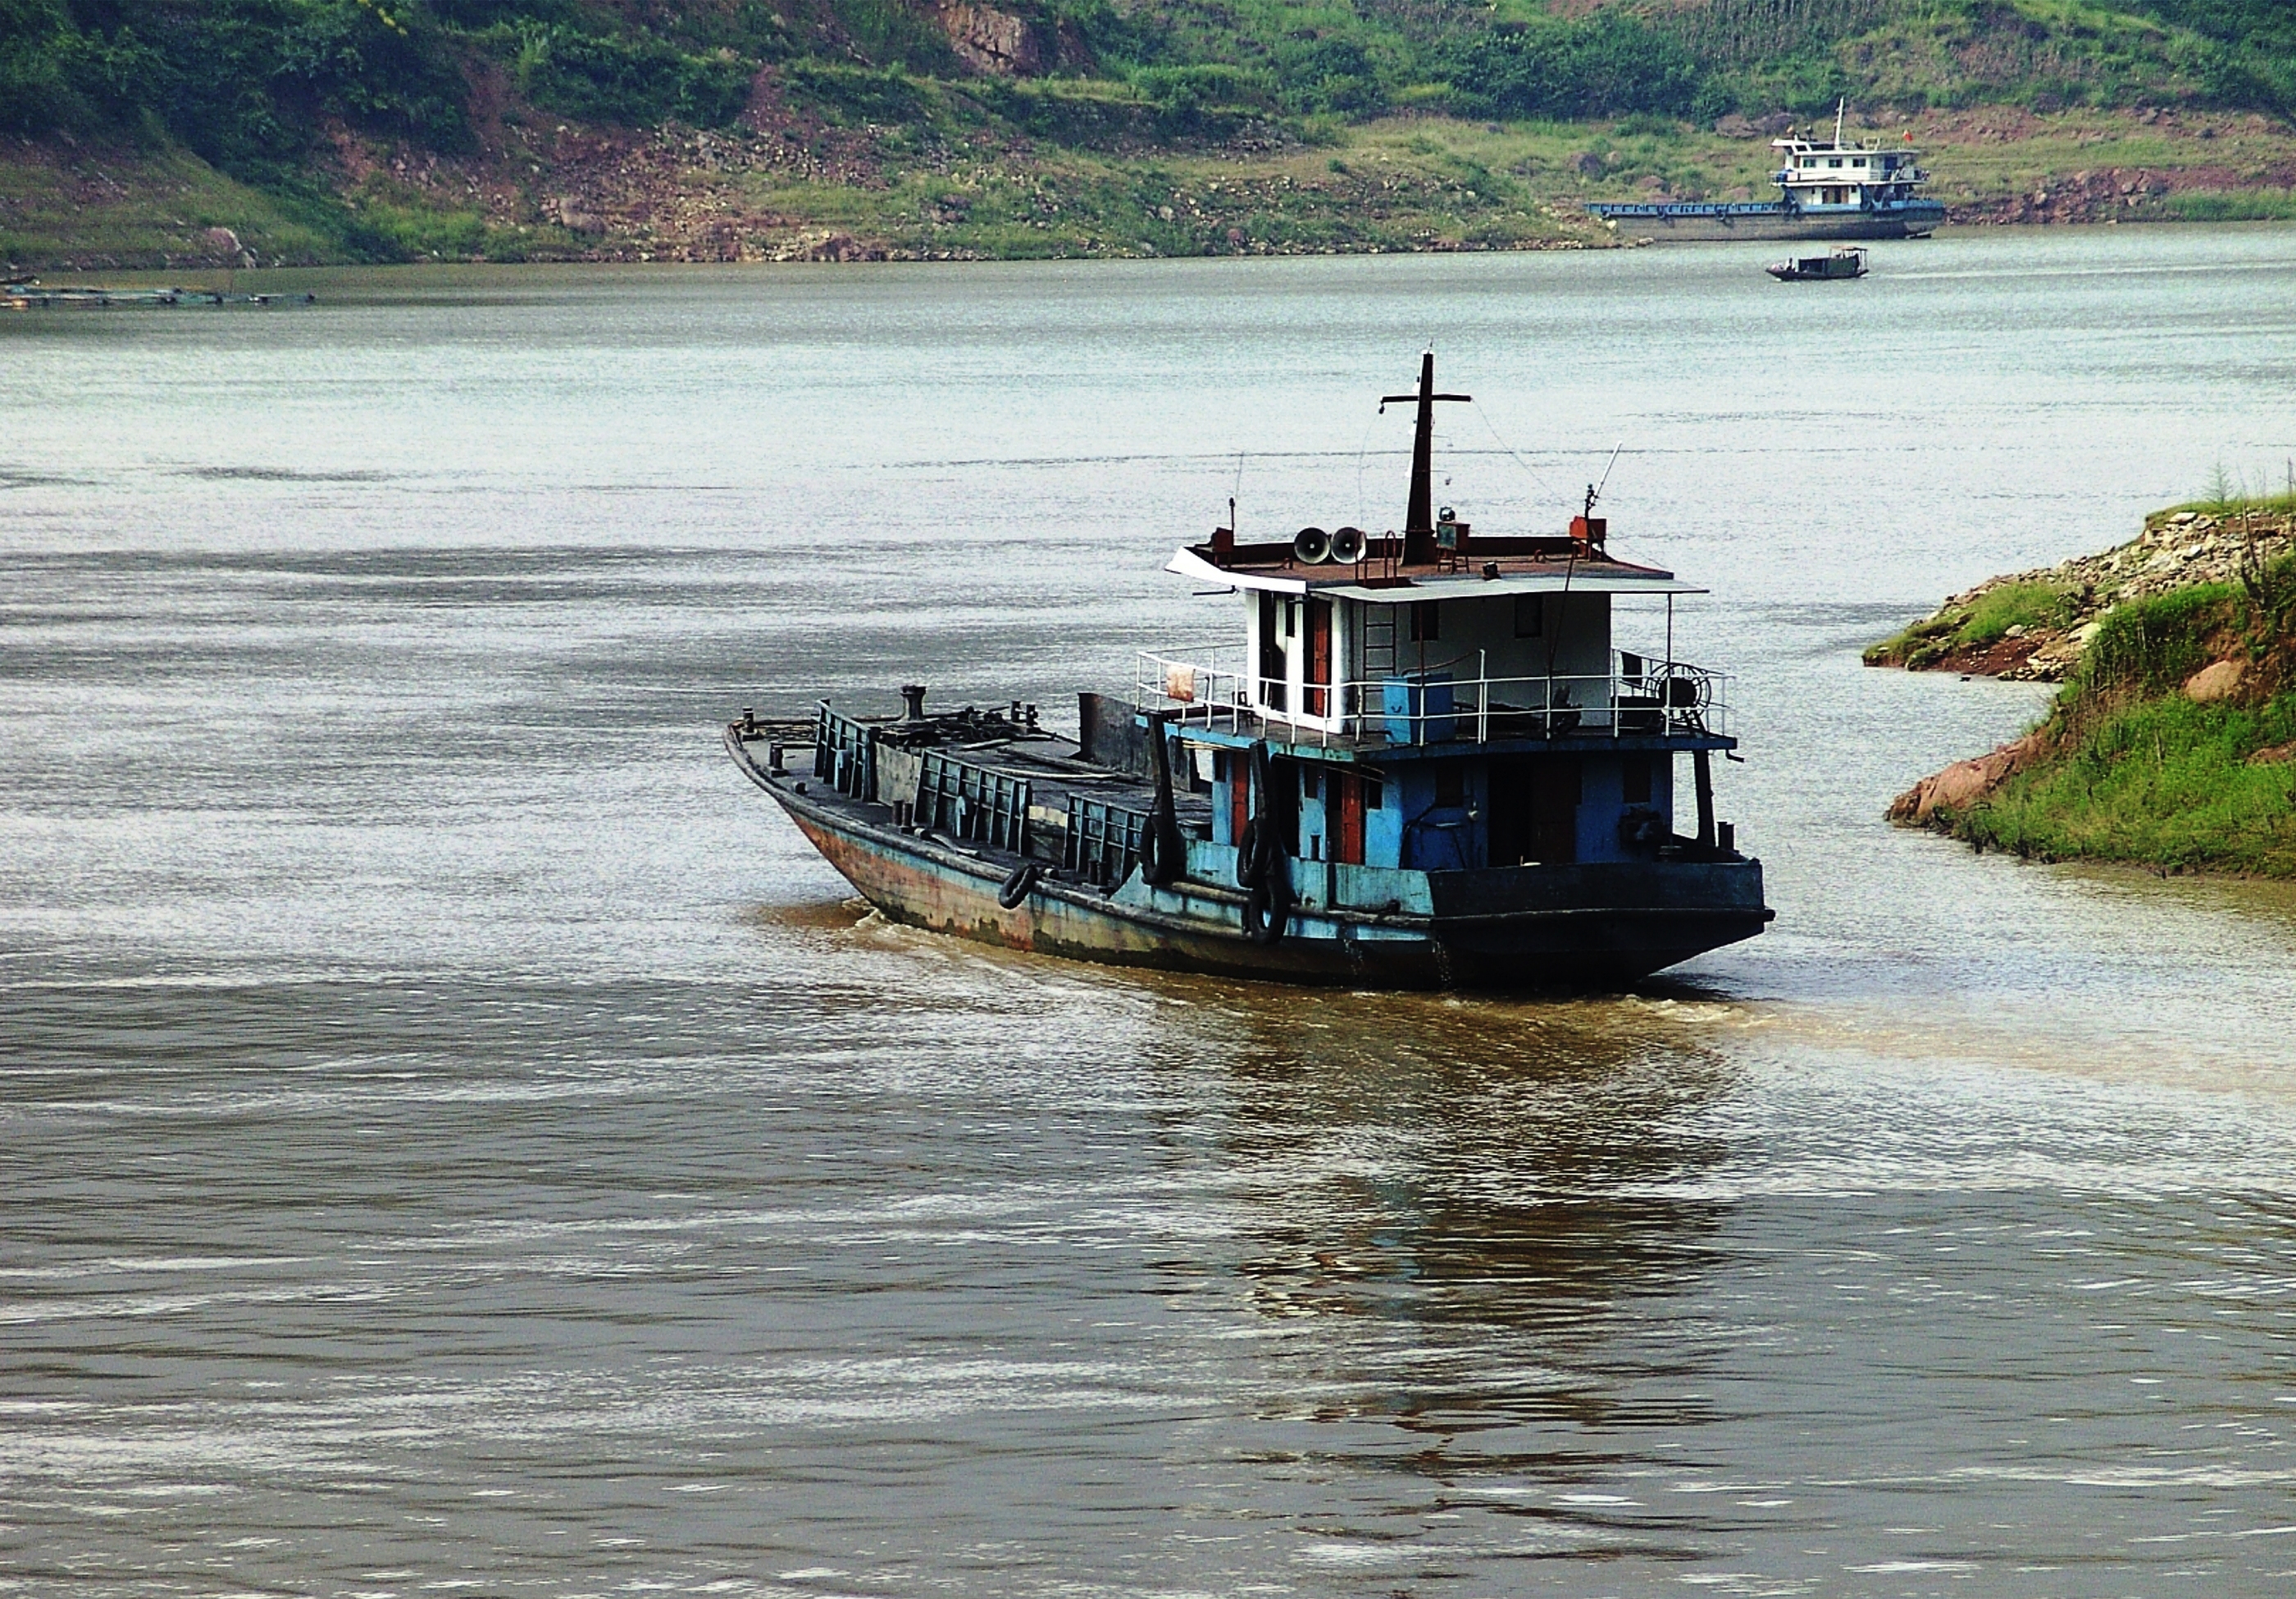 Chinese barges on the river Chang Jiang